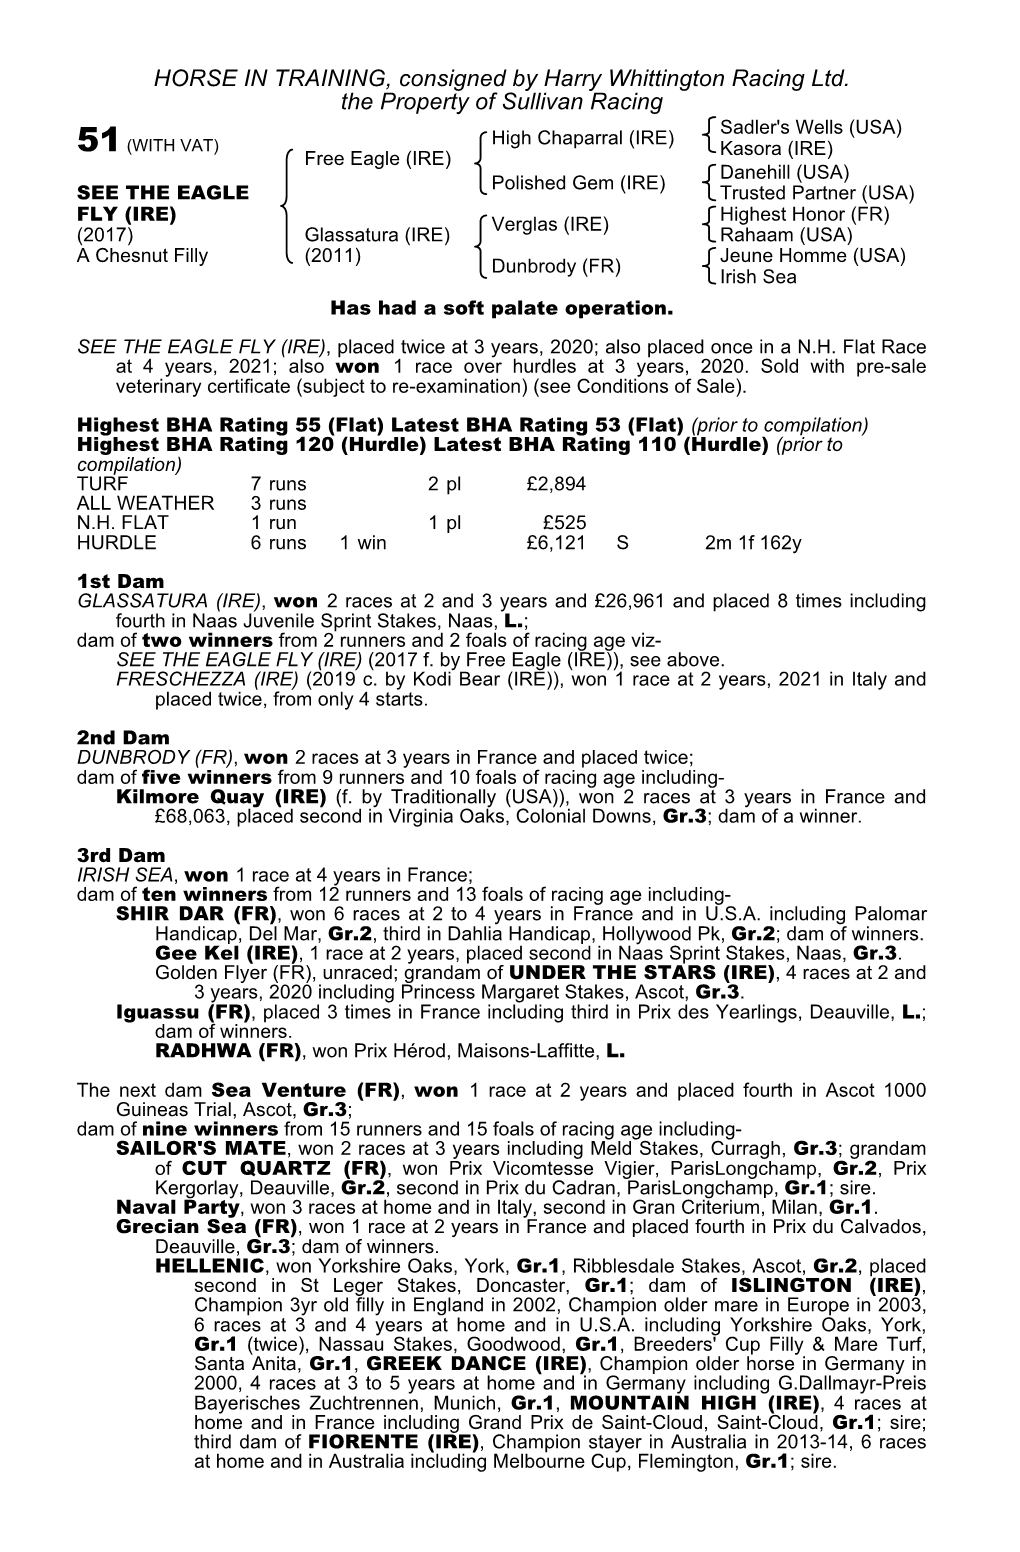 HORSE in TRAINING, Consigned by Harry Whittington Racing Ltd. The